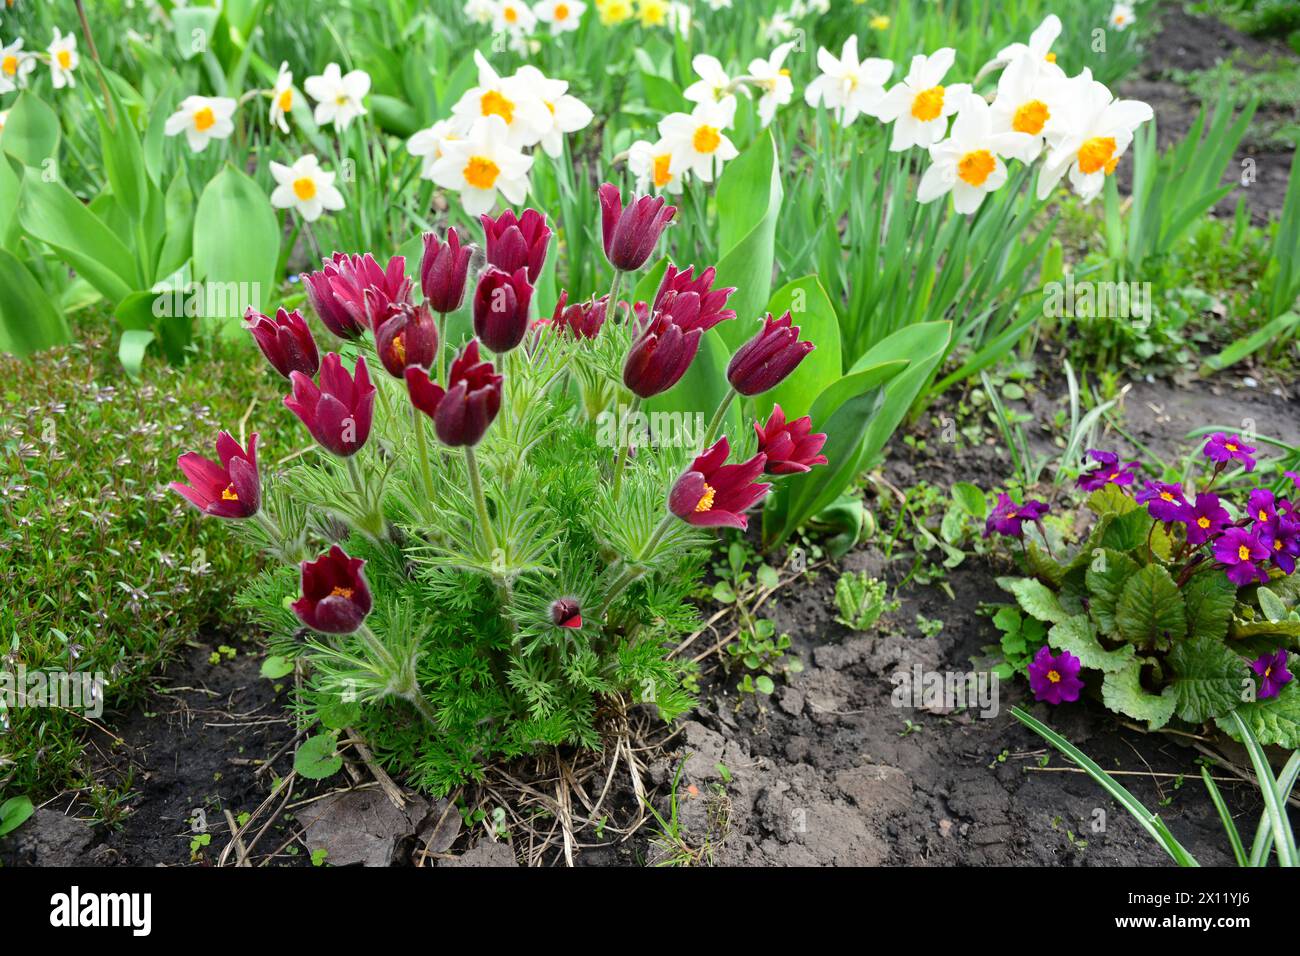 A close-up on a beautiful spring flower bed with Pulsatilla vulgaris, the pasqueflower,  Primula veris, daffodil and creeping phlox. Stock Photo